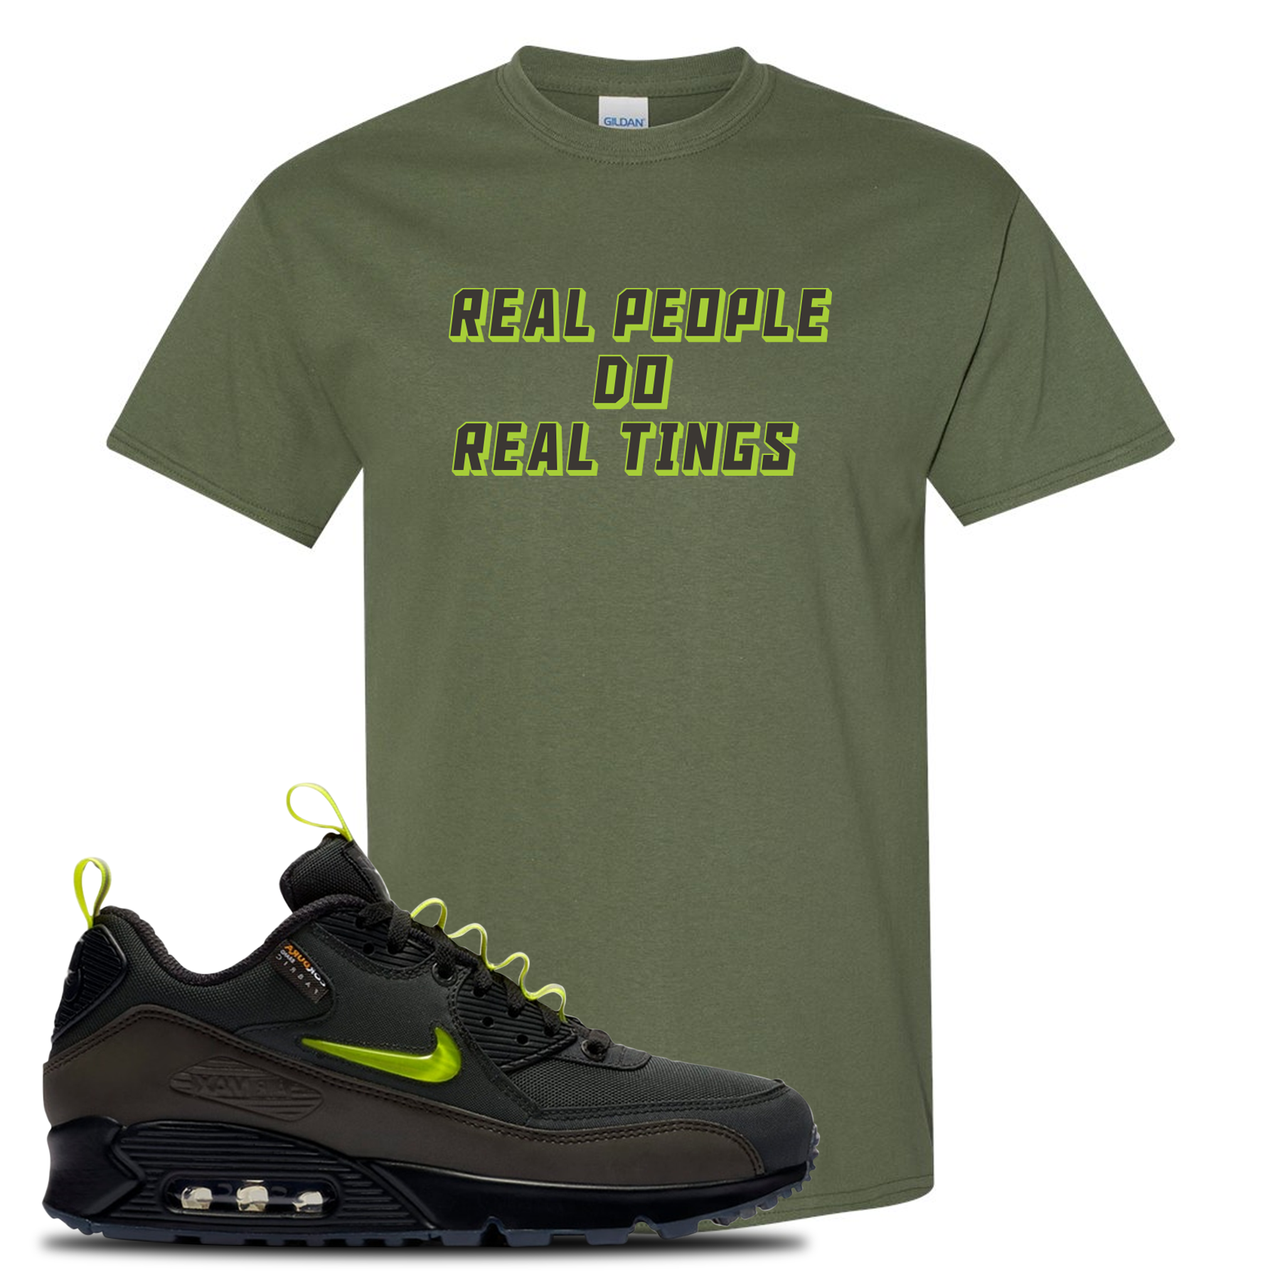 The Basement X Air Max 90 Manchester Real People Do Real Things Military Green Sneaker Hook Up T-Shirt